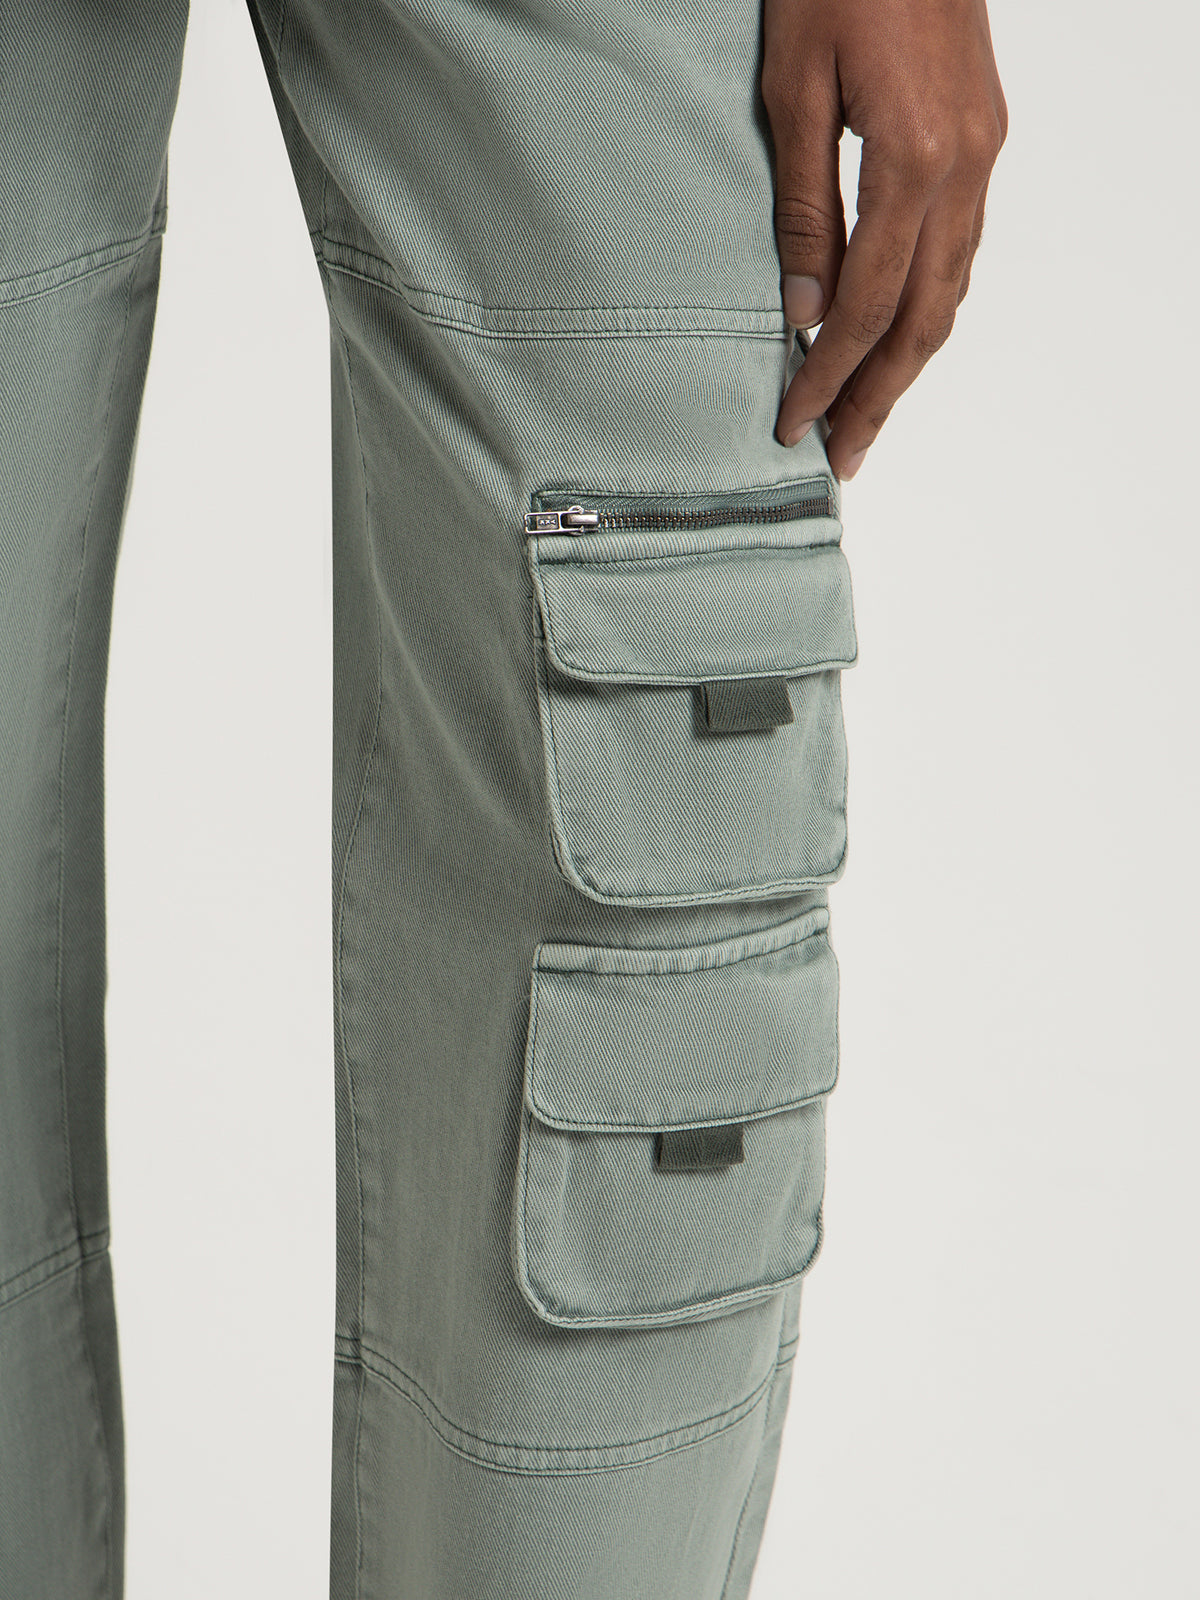 Stamped Owwy Utility Cargo Jeans in Sage Green